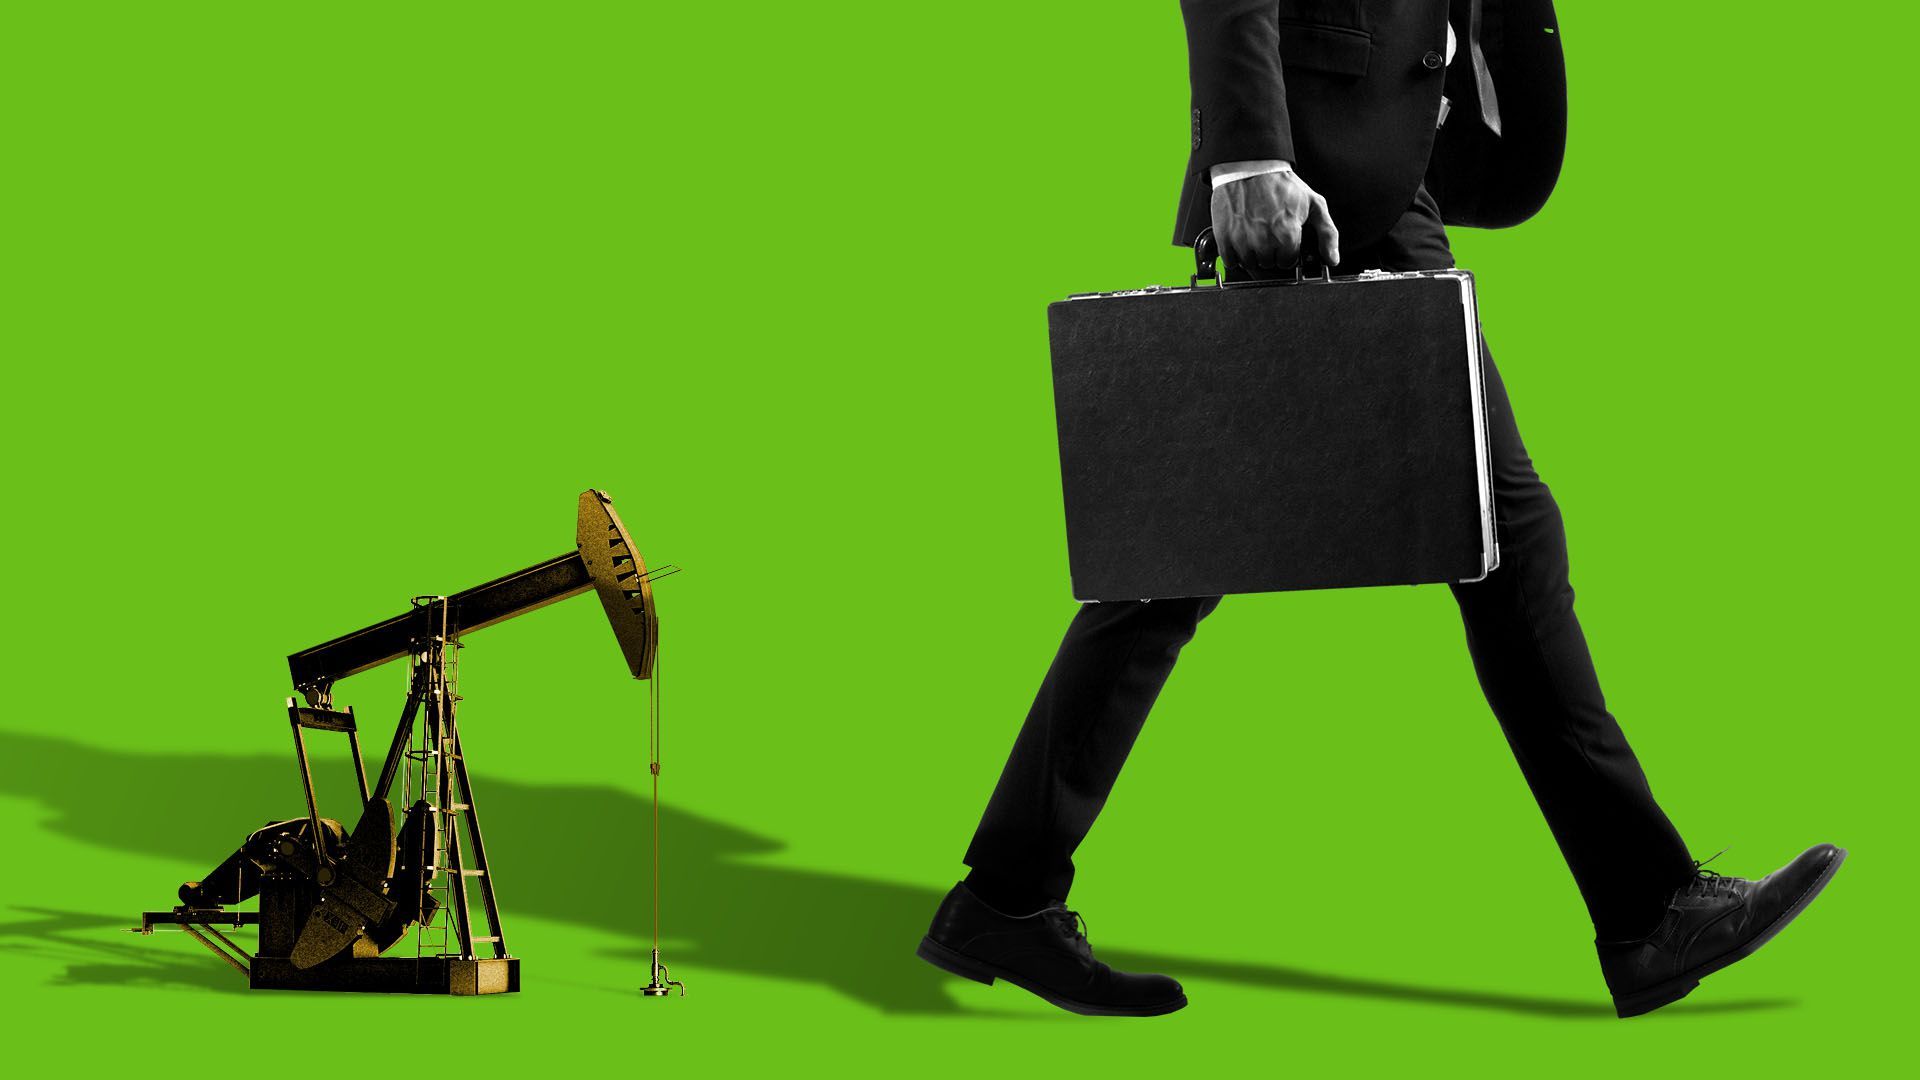 Illustration of a businessman walking away from an oil rig with green background